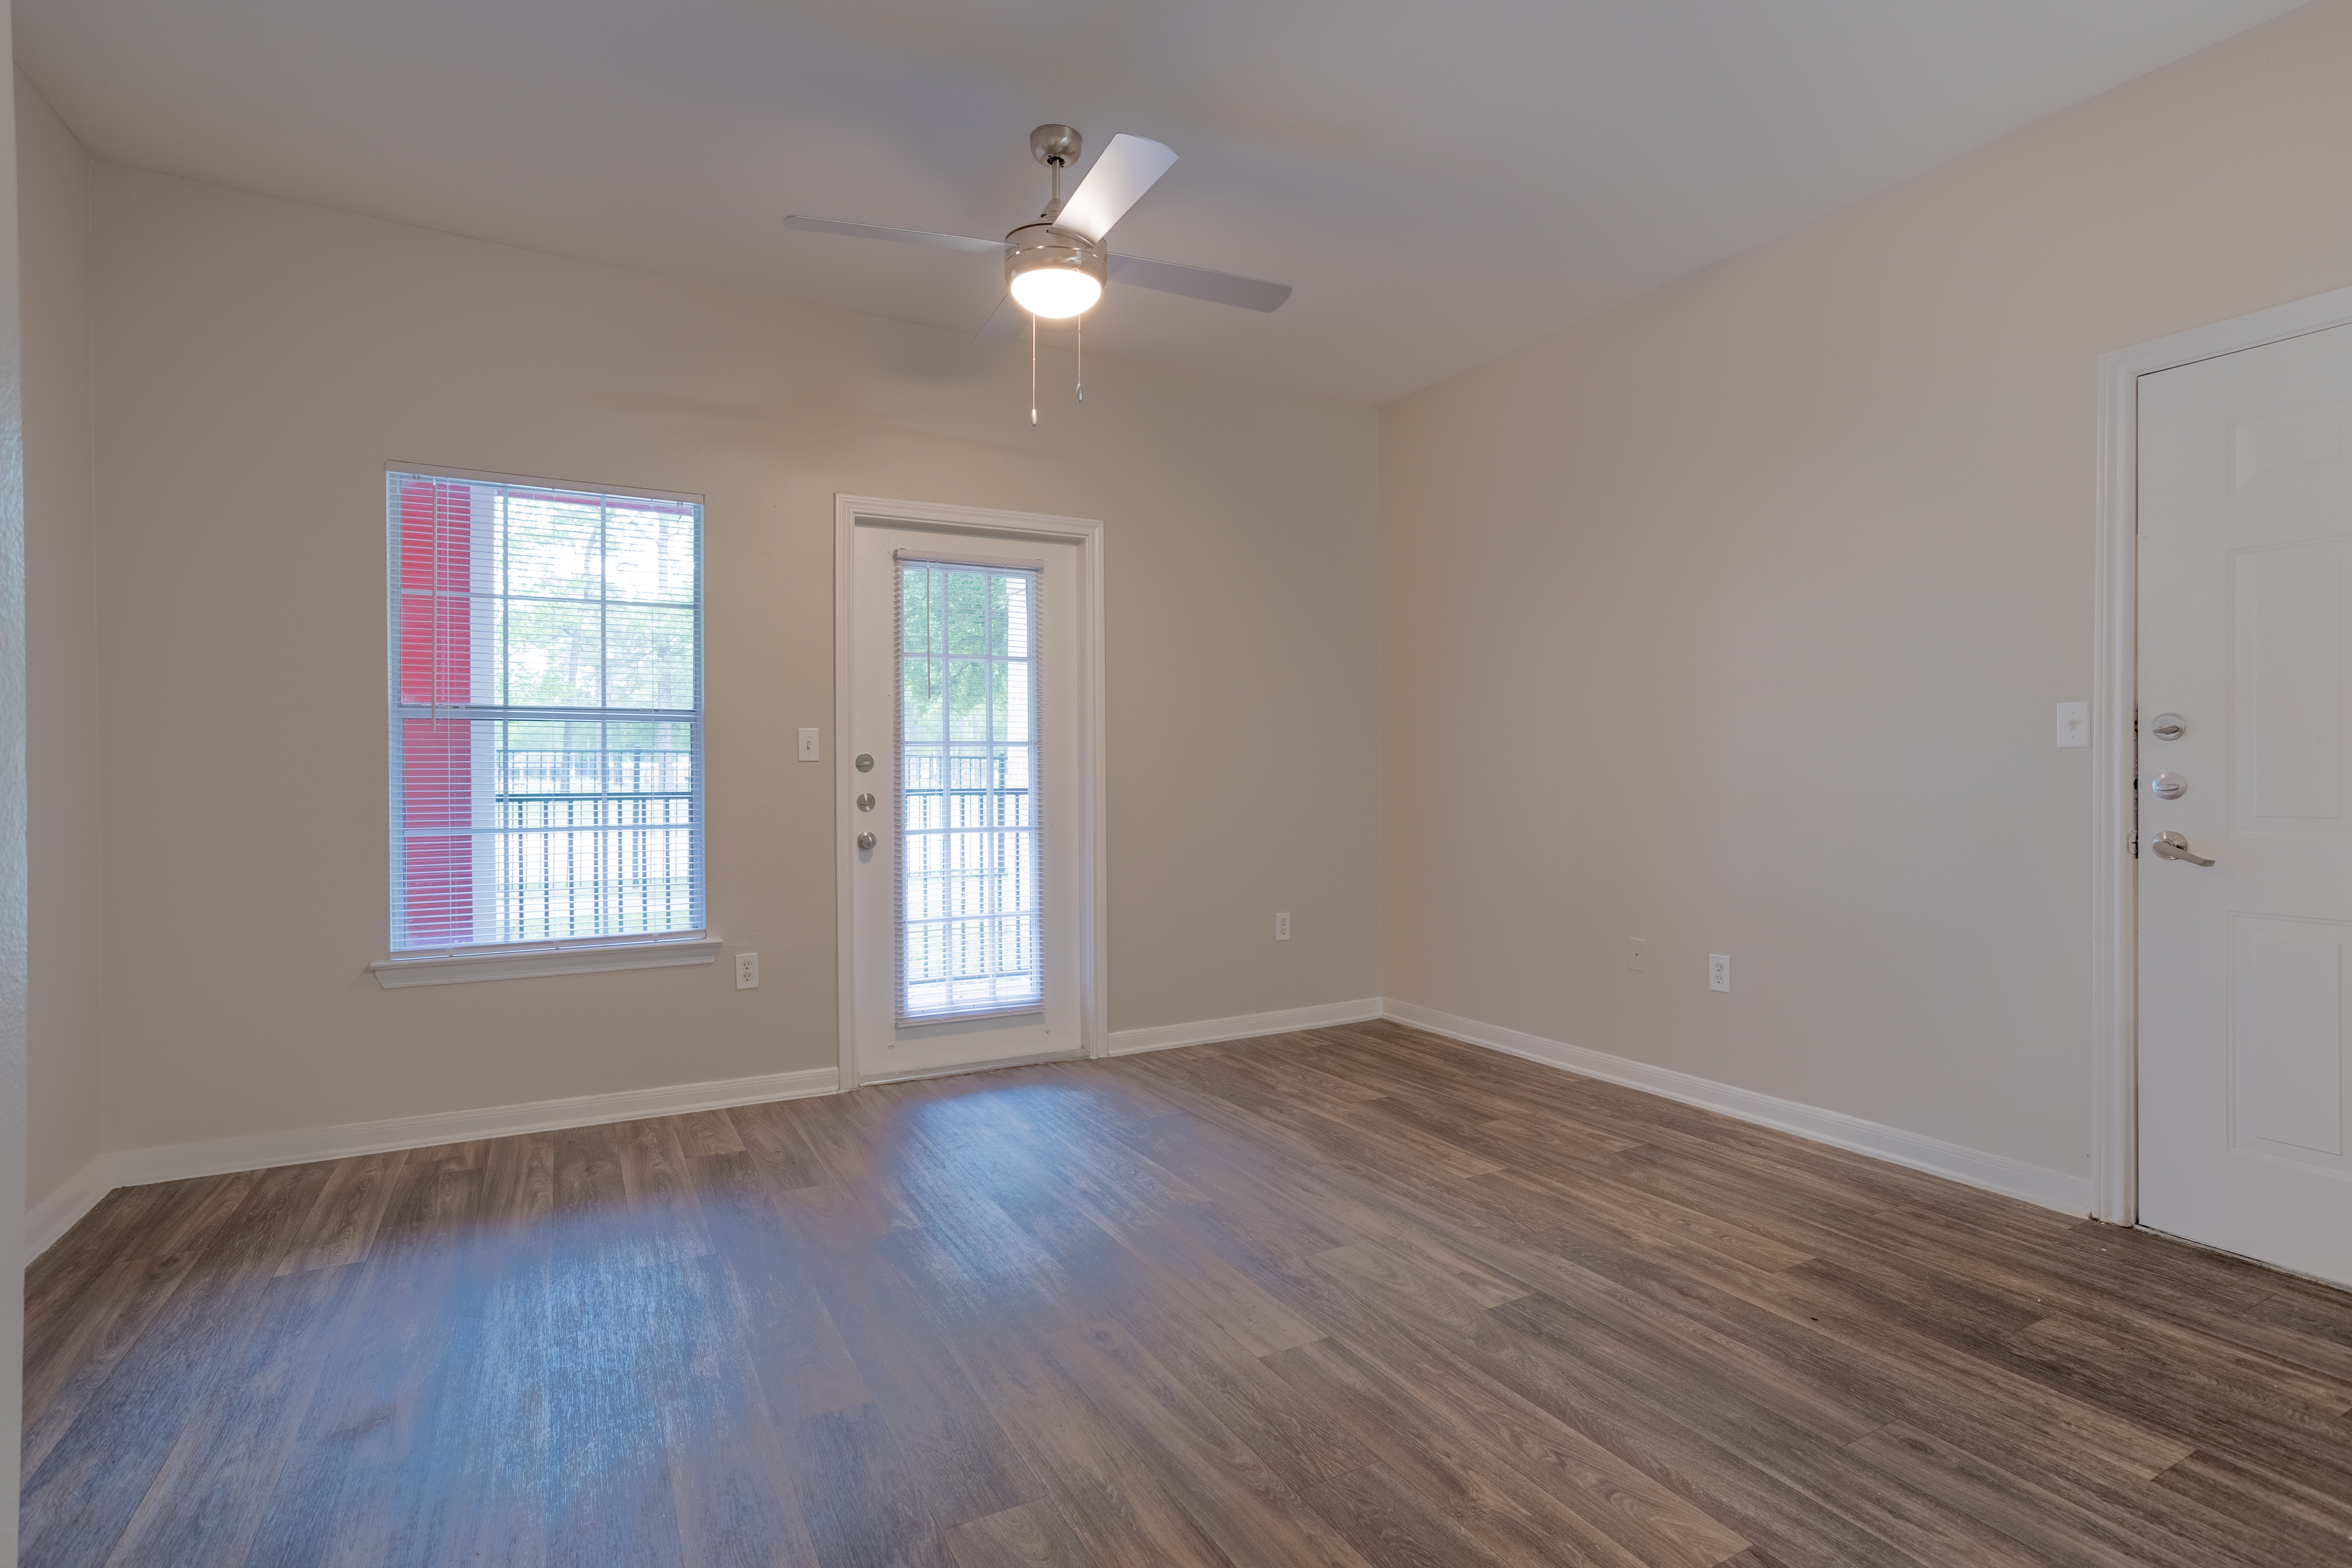 North Forest Trails Apts Houston 1 bedroom apartment living room with ceiling fan